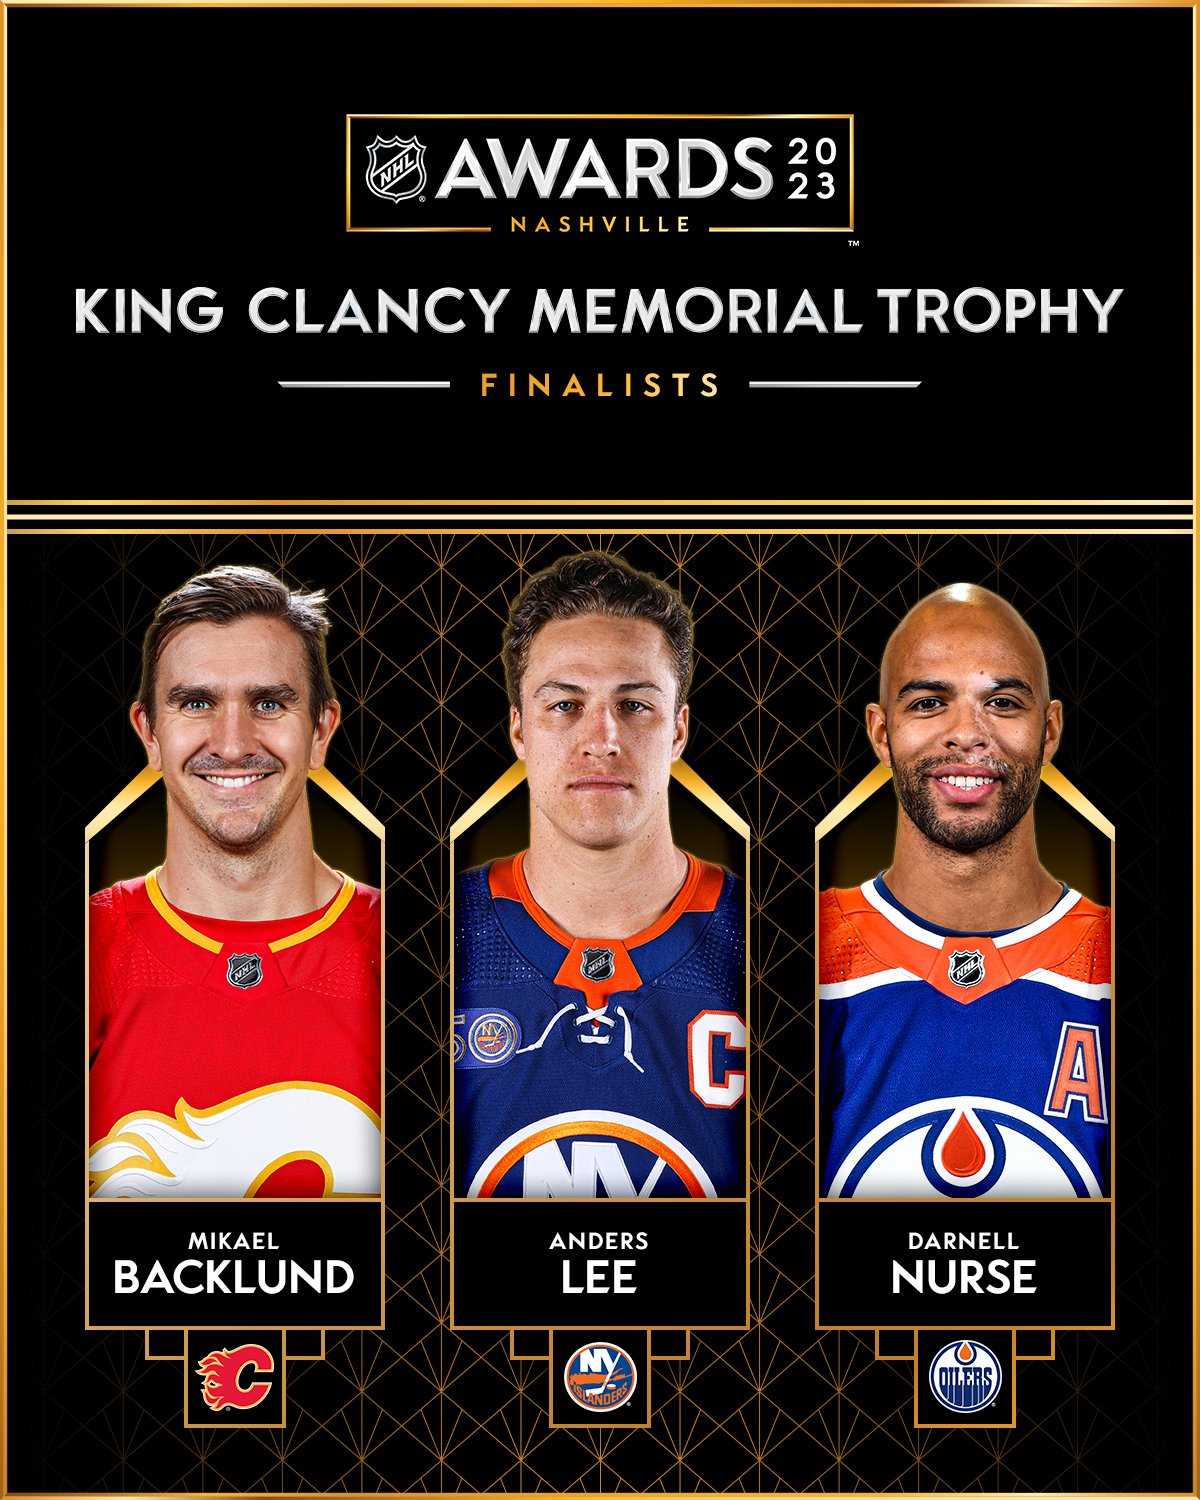 Mikael Backlund wins King Clancy Memorial Trophy